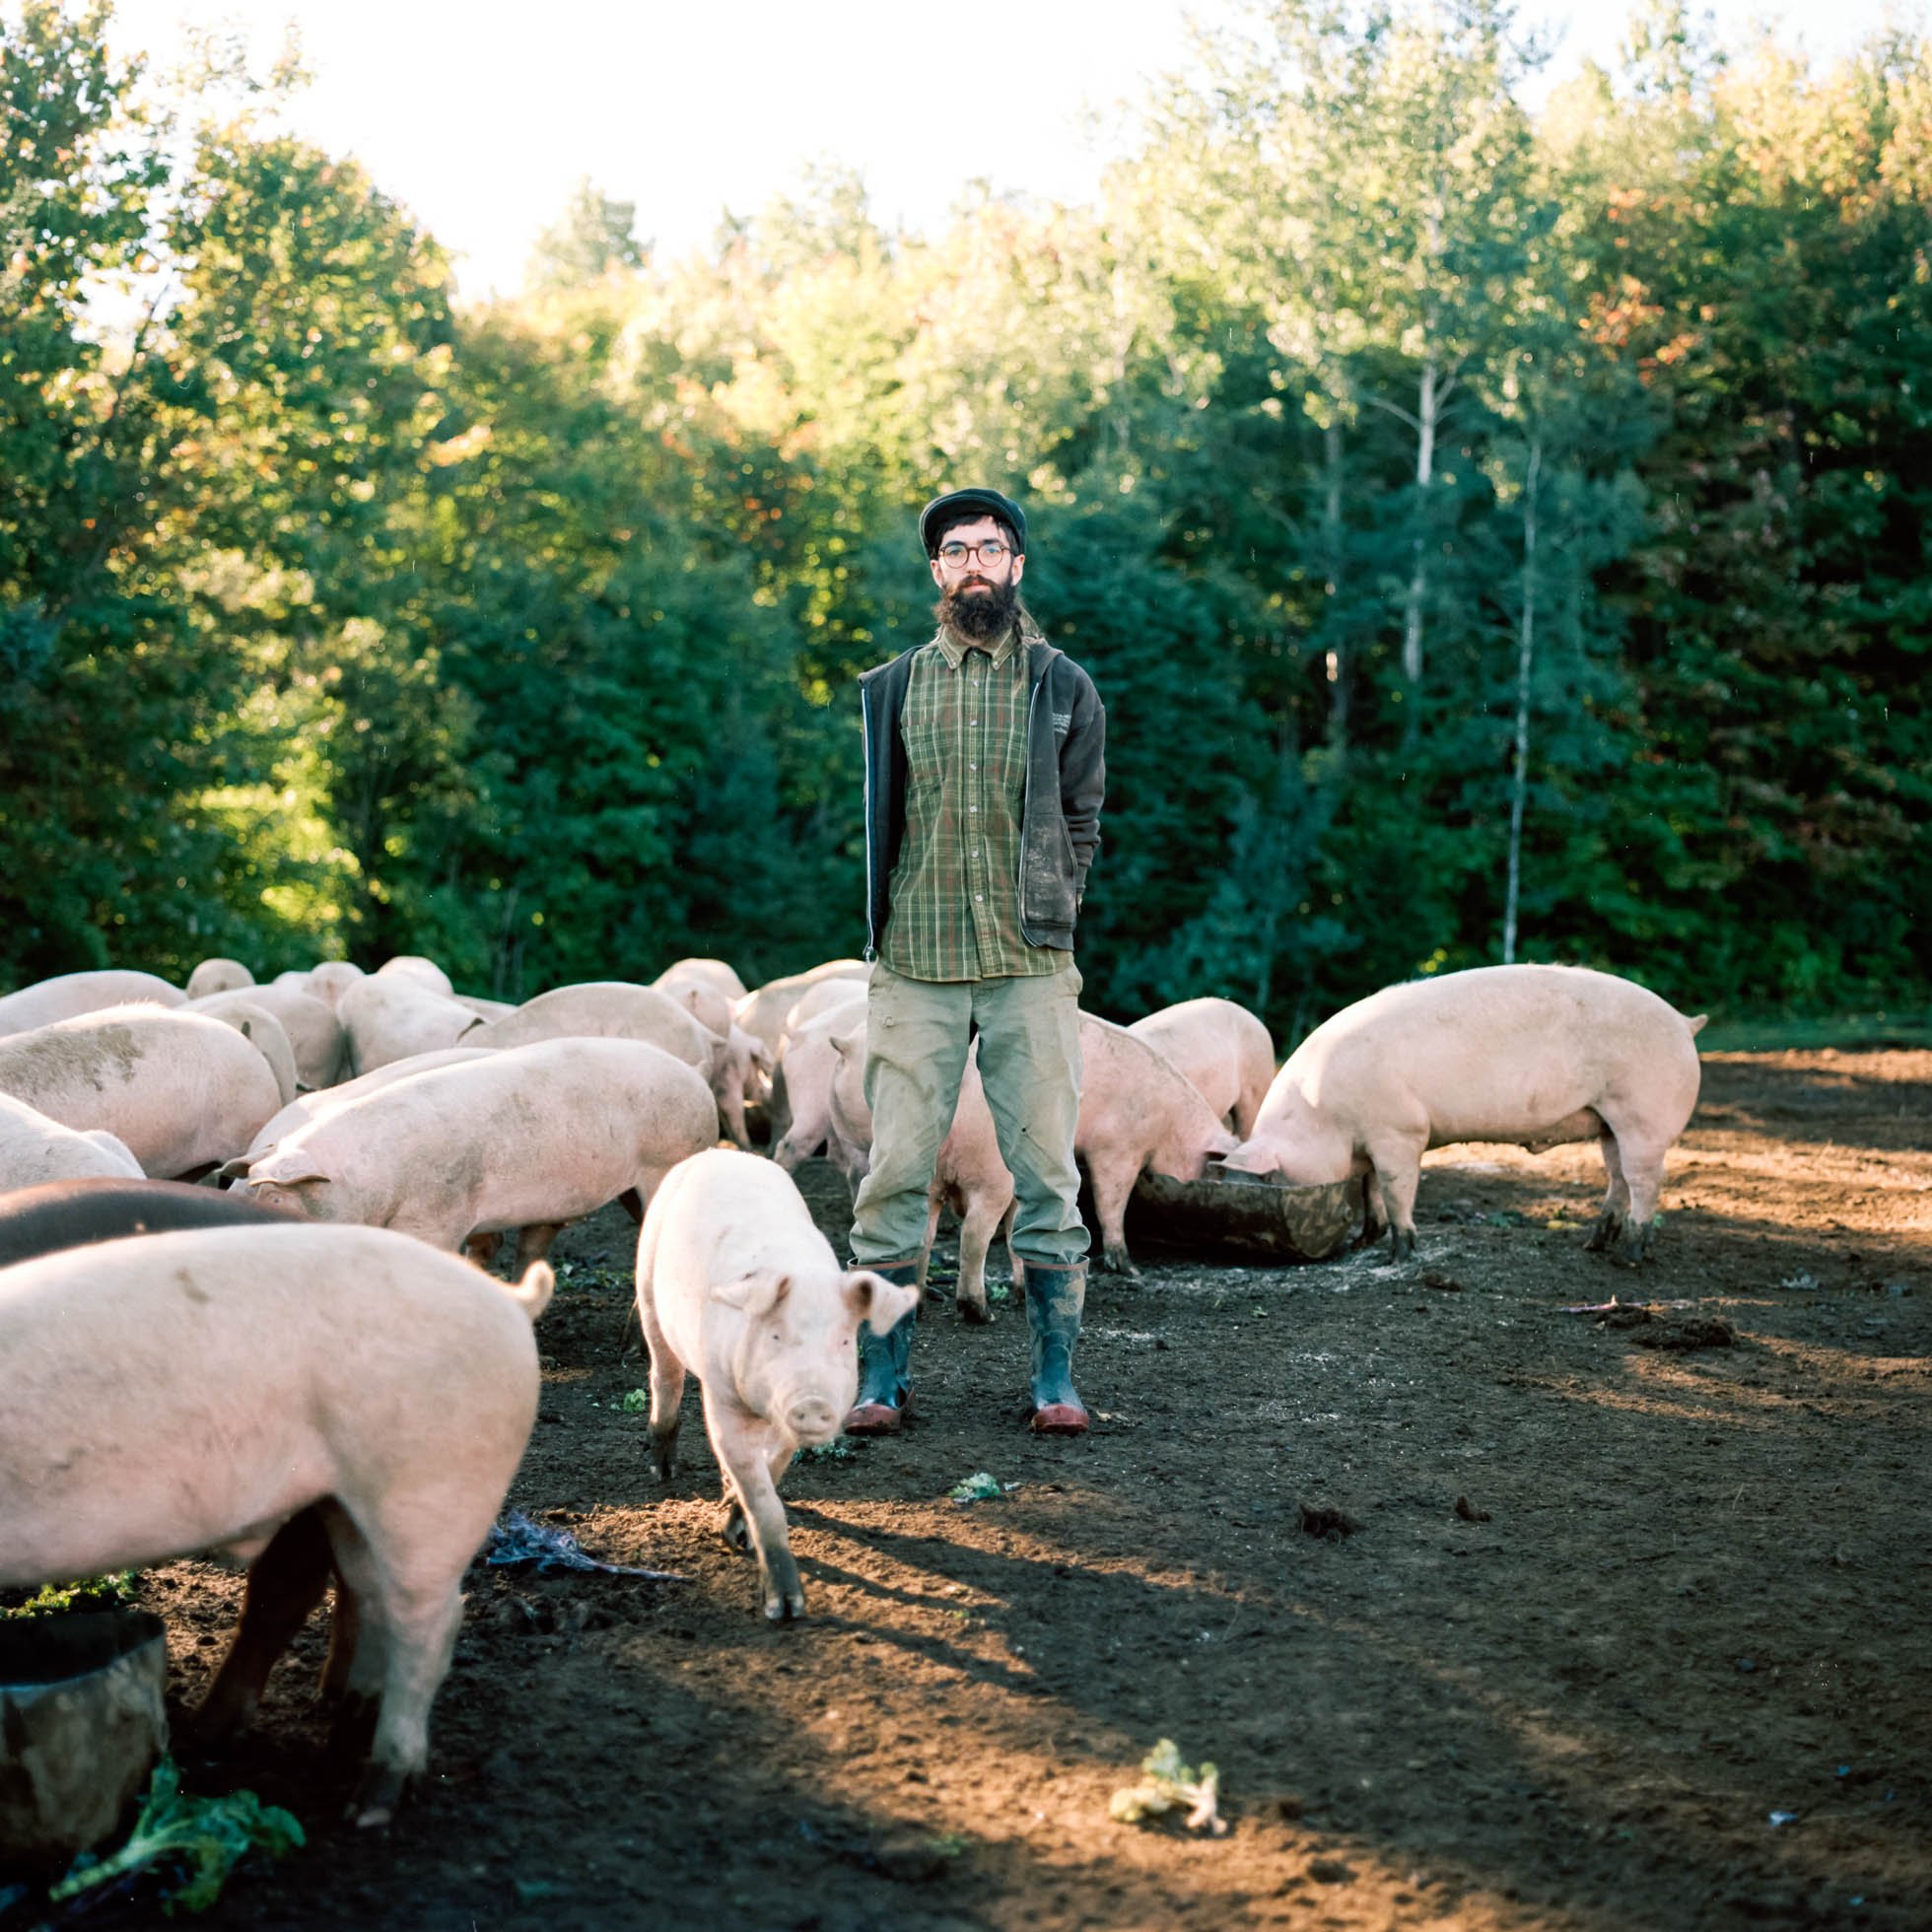  Étienne, a Quebec farm worker, raises pigs at his farm, providing ethically raised meat for the local food economy. (Québec Farm Workers 2016) 